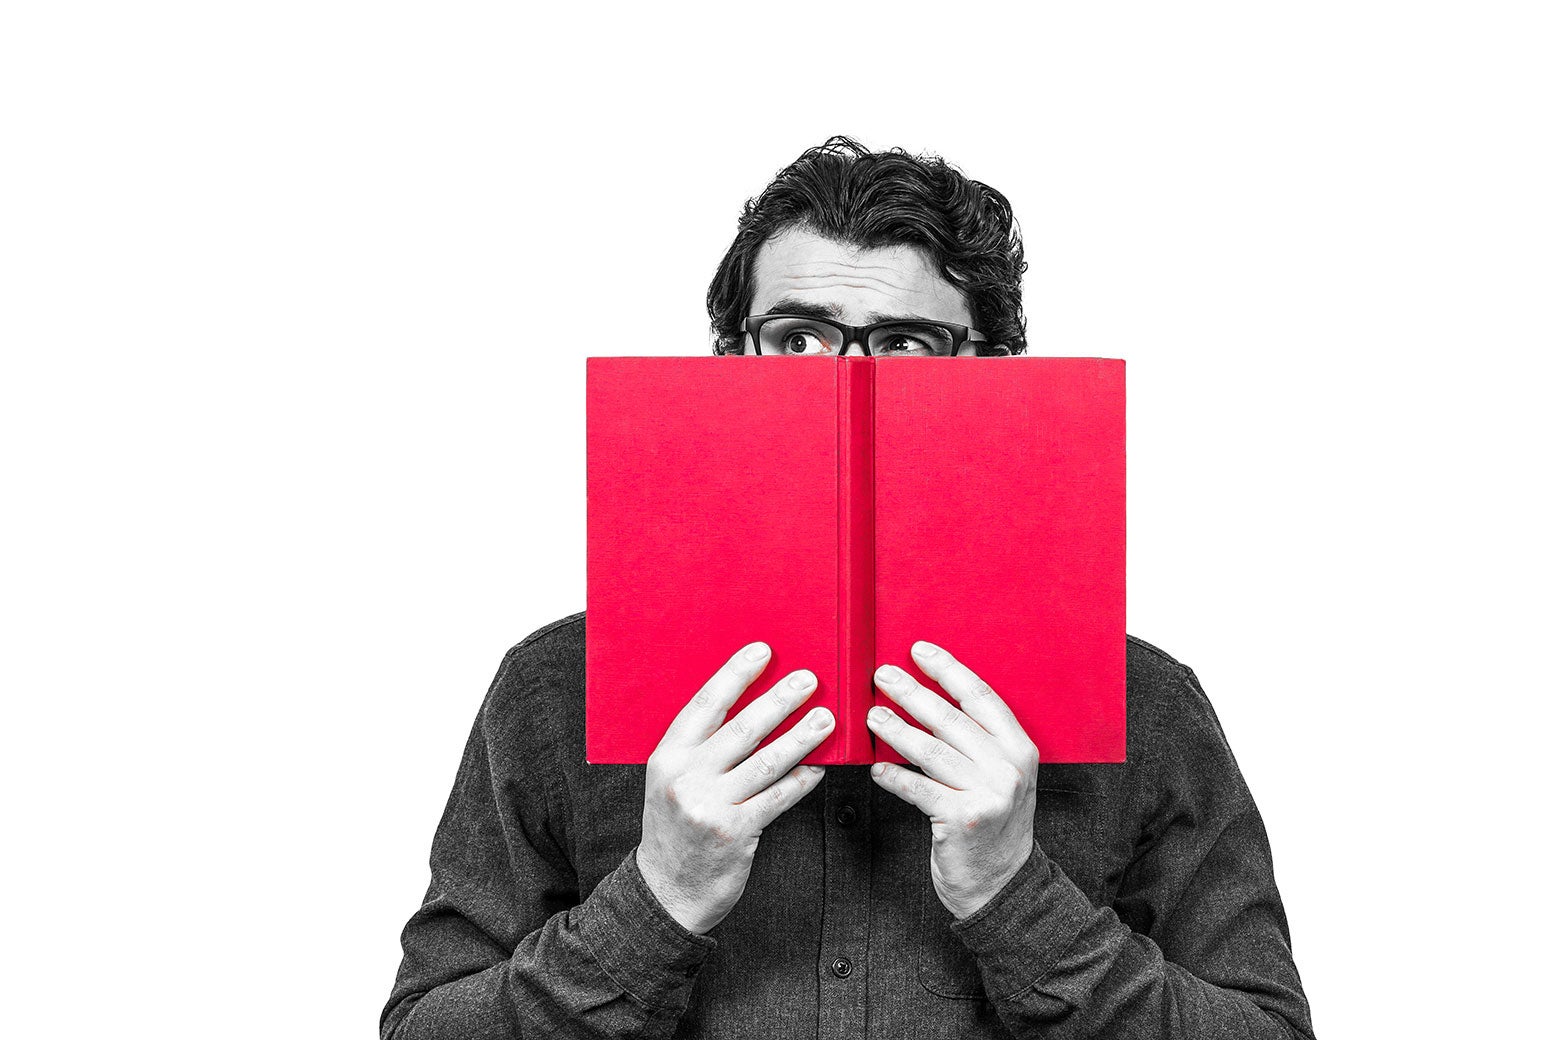 Man wearing glasses hiding behind a book.